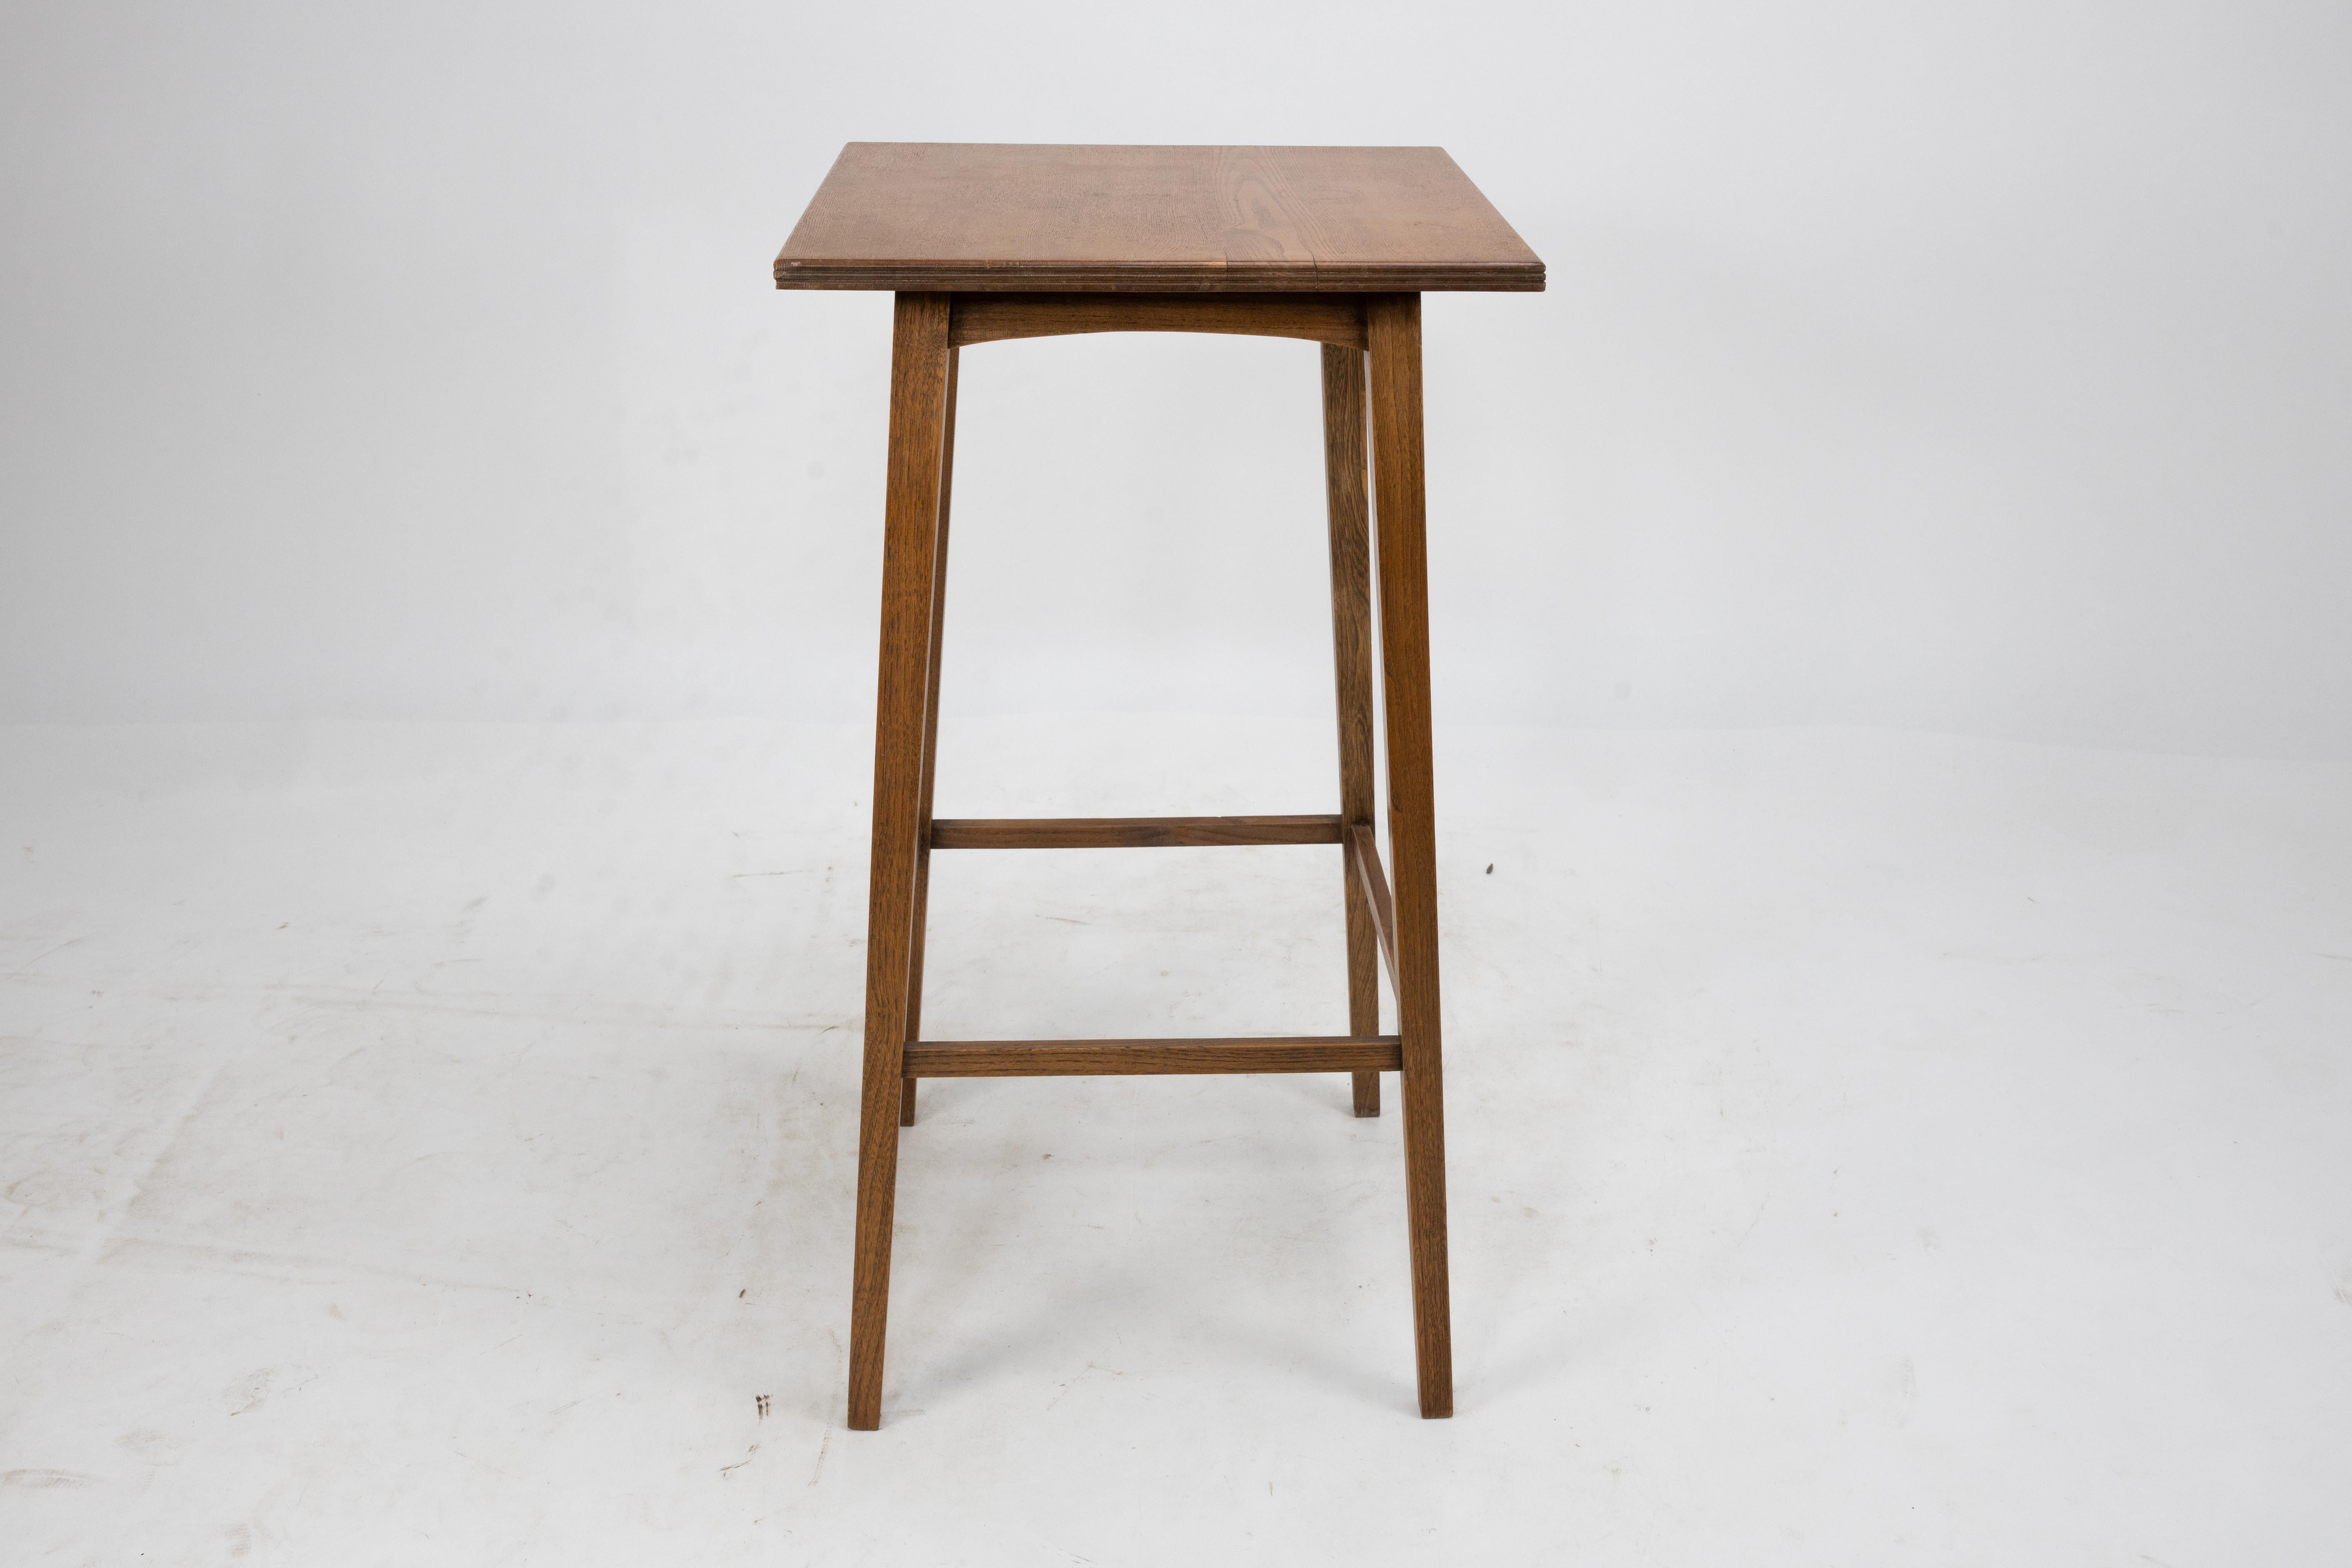 Shapland and Petter of Barnstaple. A small Arts and Crafts Ash side table with a moulded edge to the wild grain top with arched aprons below on fine slender tapering legs united by stretchers.